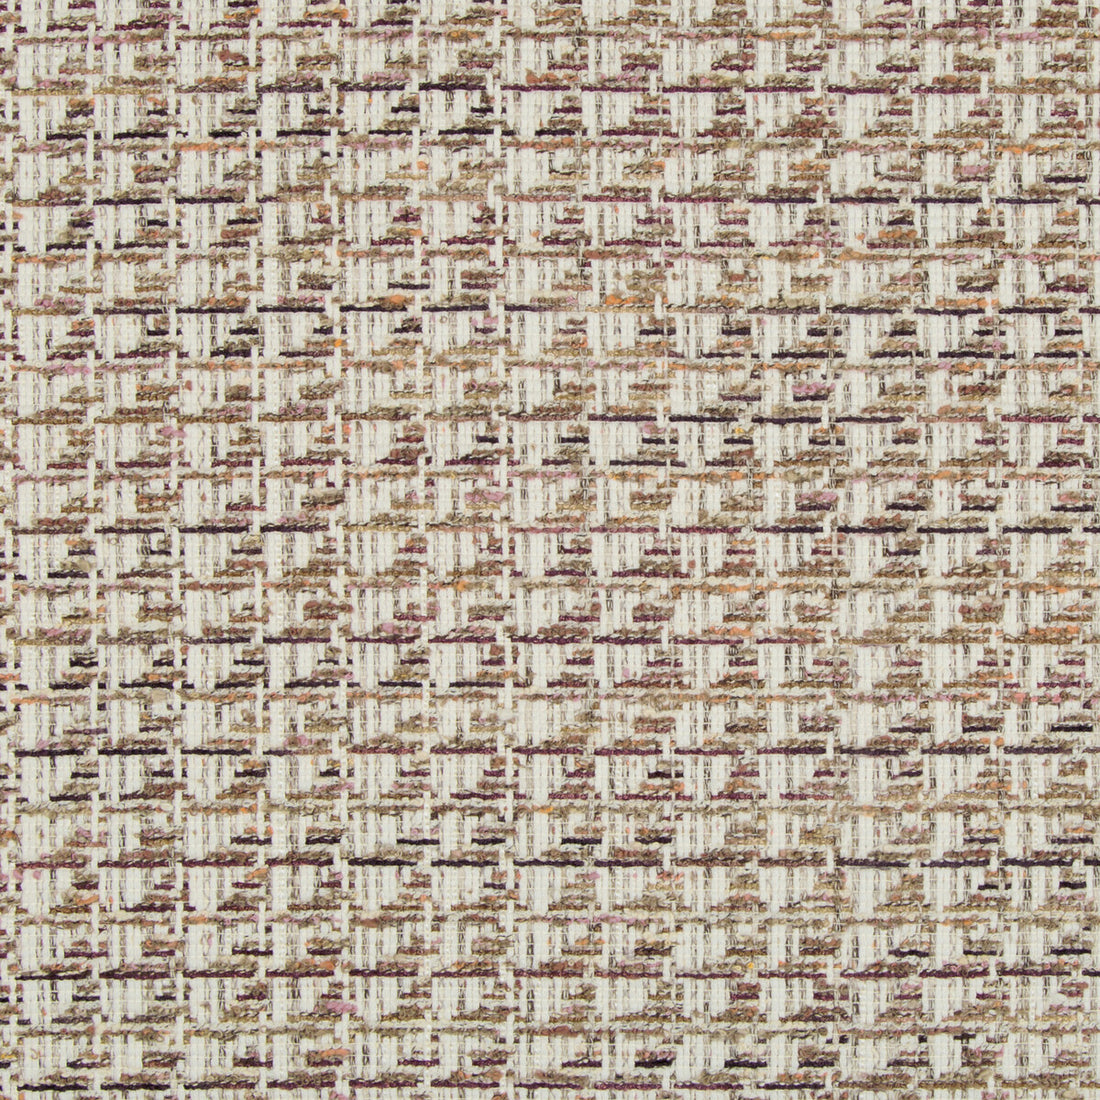 Tweed Jacket fabric in cinnamon color - pattern 34909.1624.0 - by Kravet Couture in the Modern Tailor collection